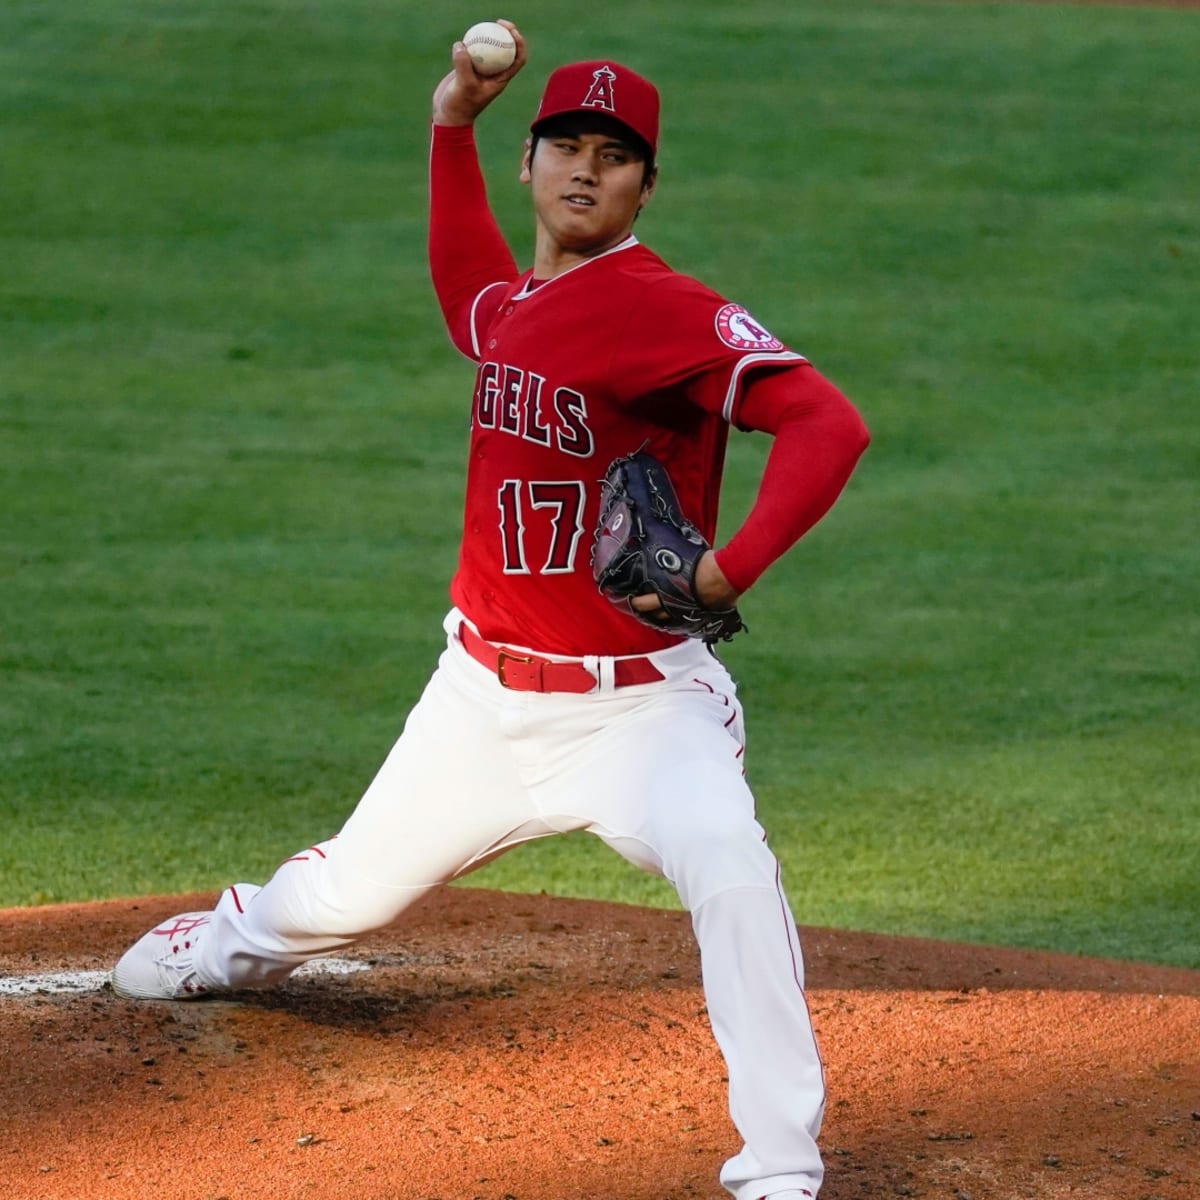 Is Shohei Ohtani 'the New Babe Ruth,' or Something Entirely New